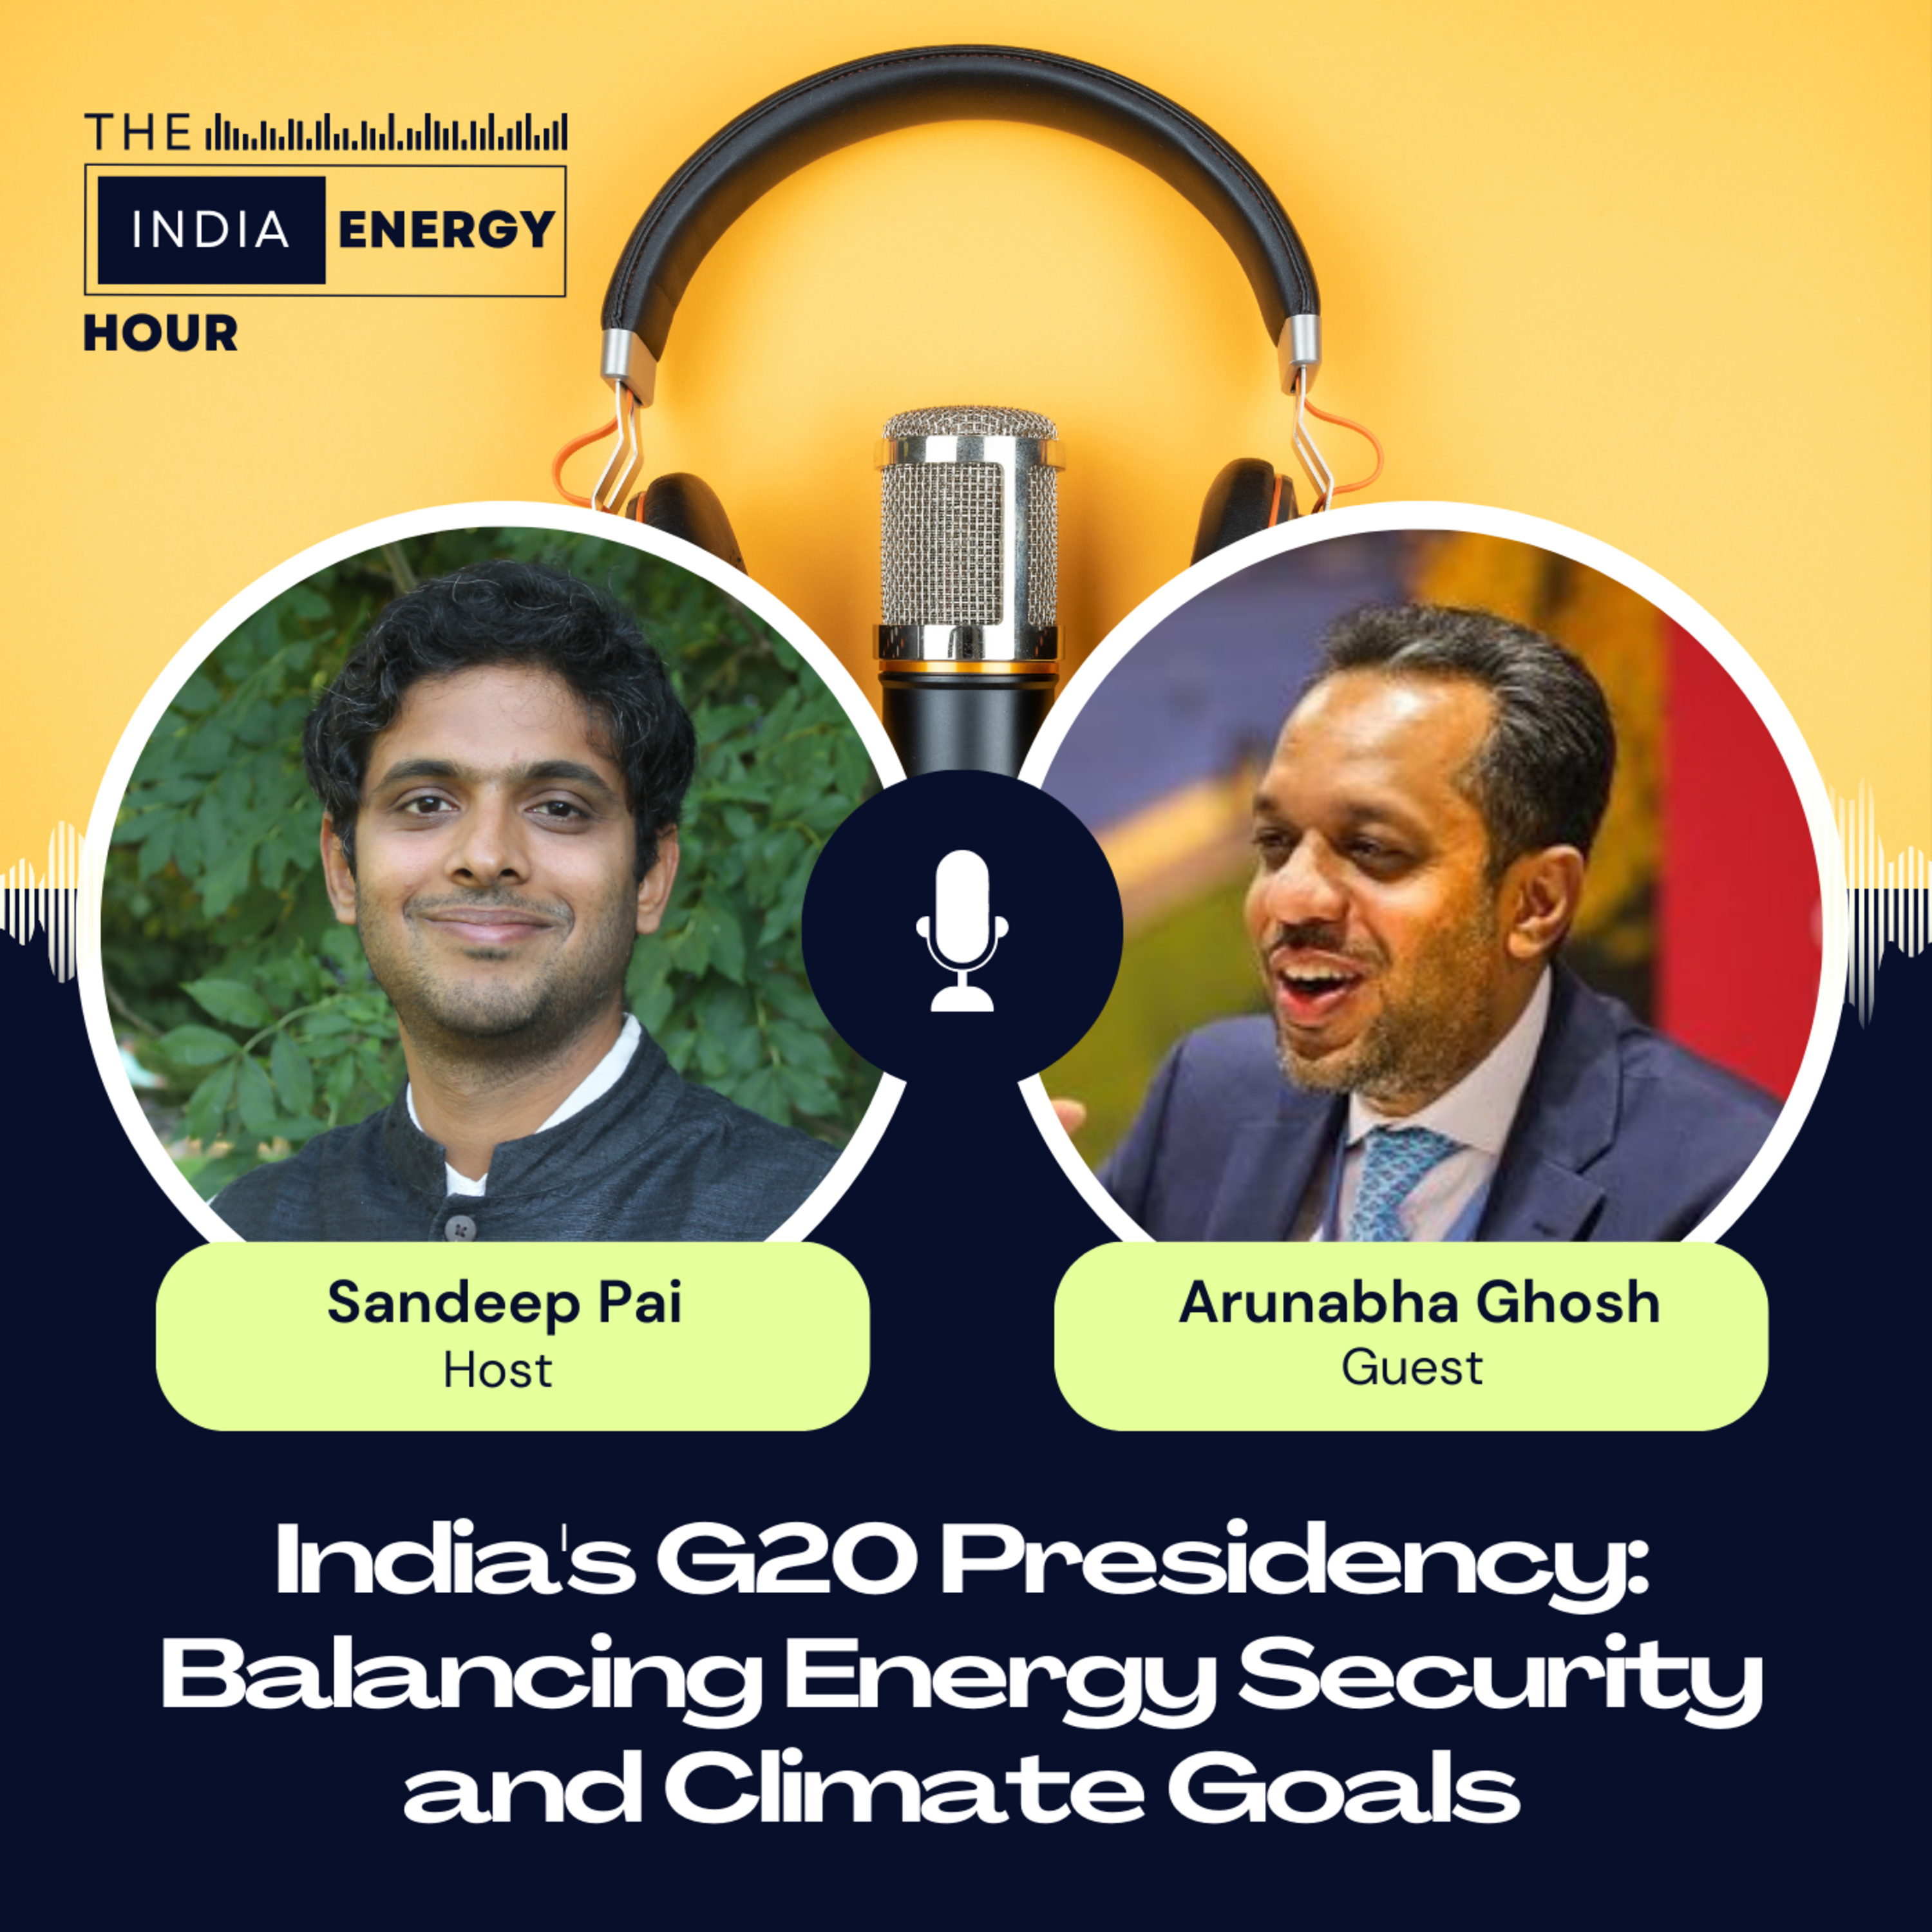 India's G20 Presidency: Balancing Energy Security and Climate Goals